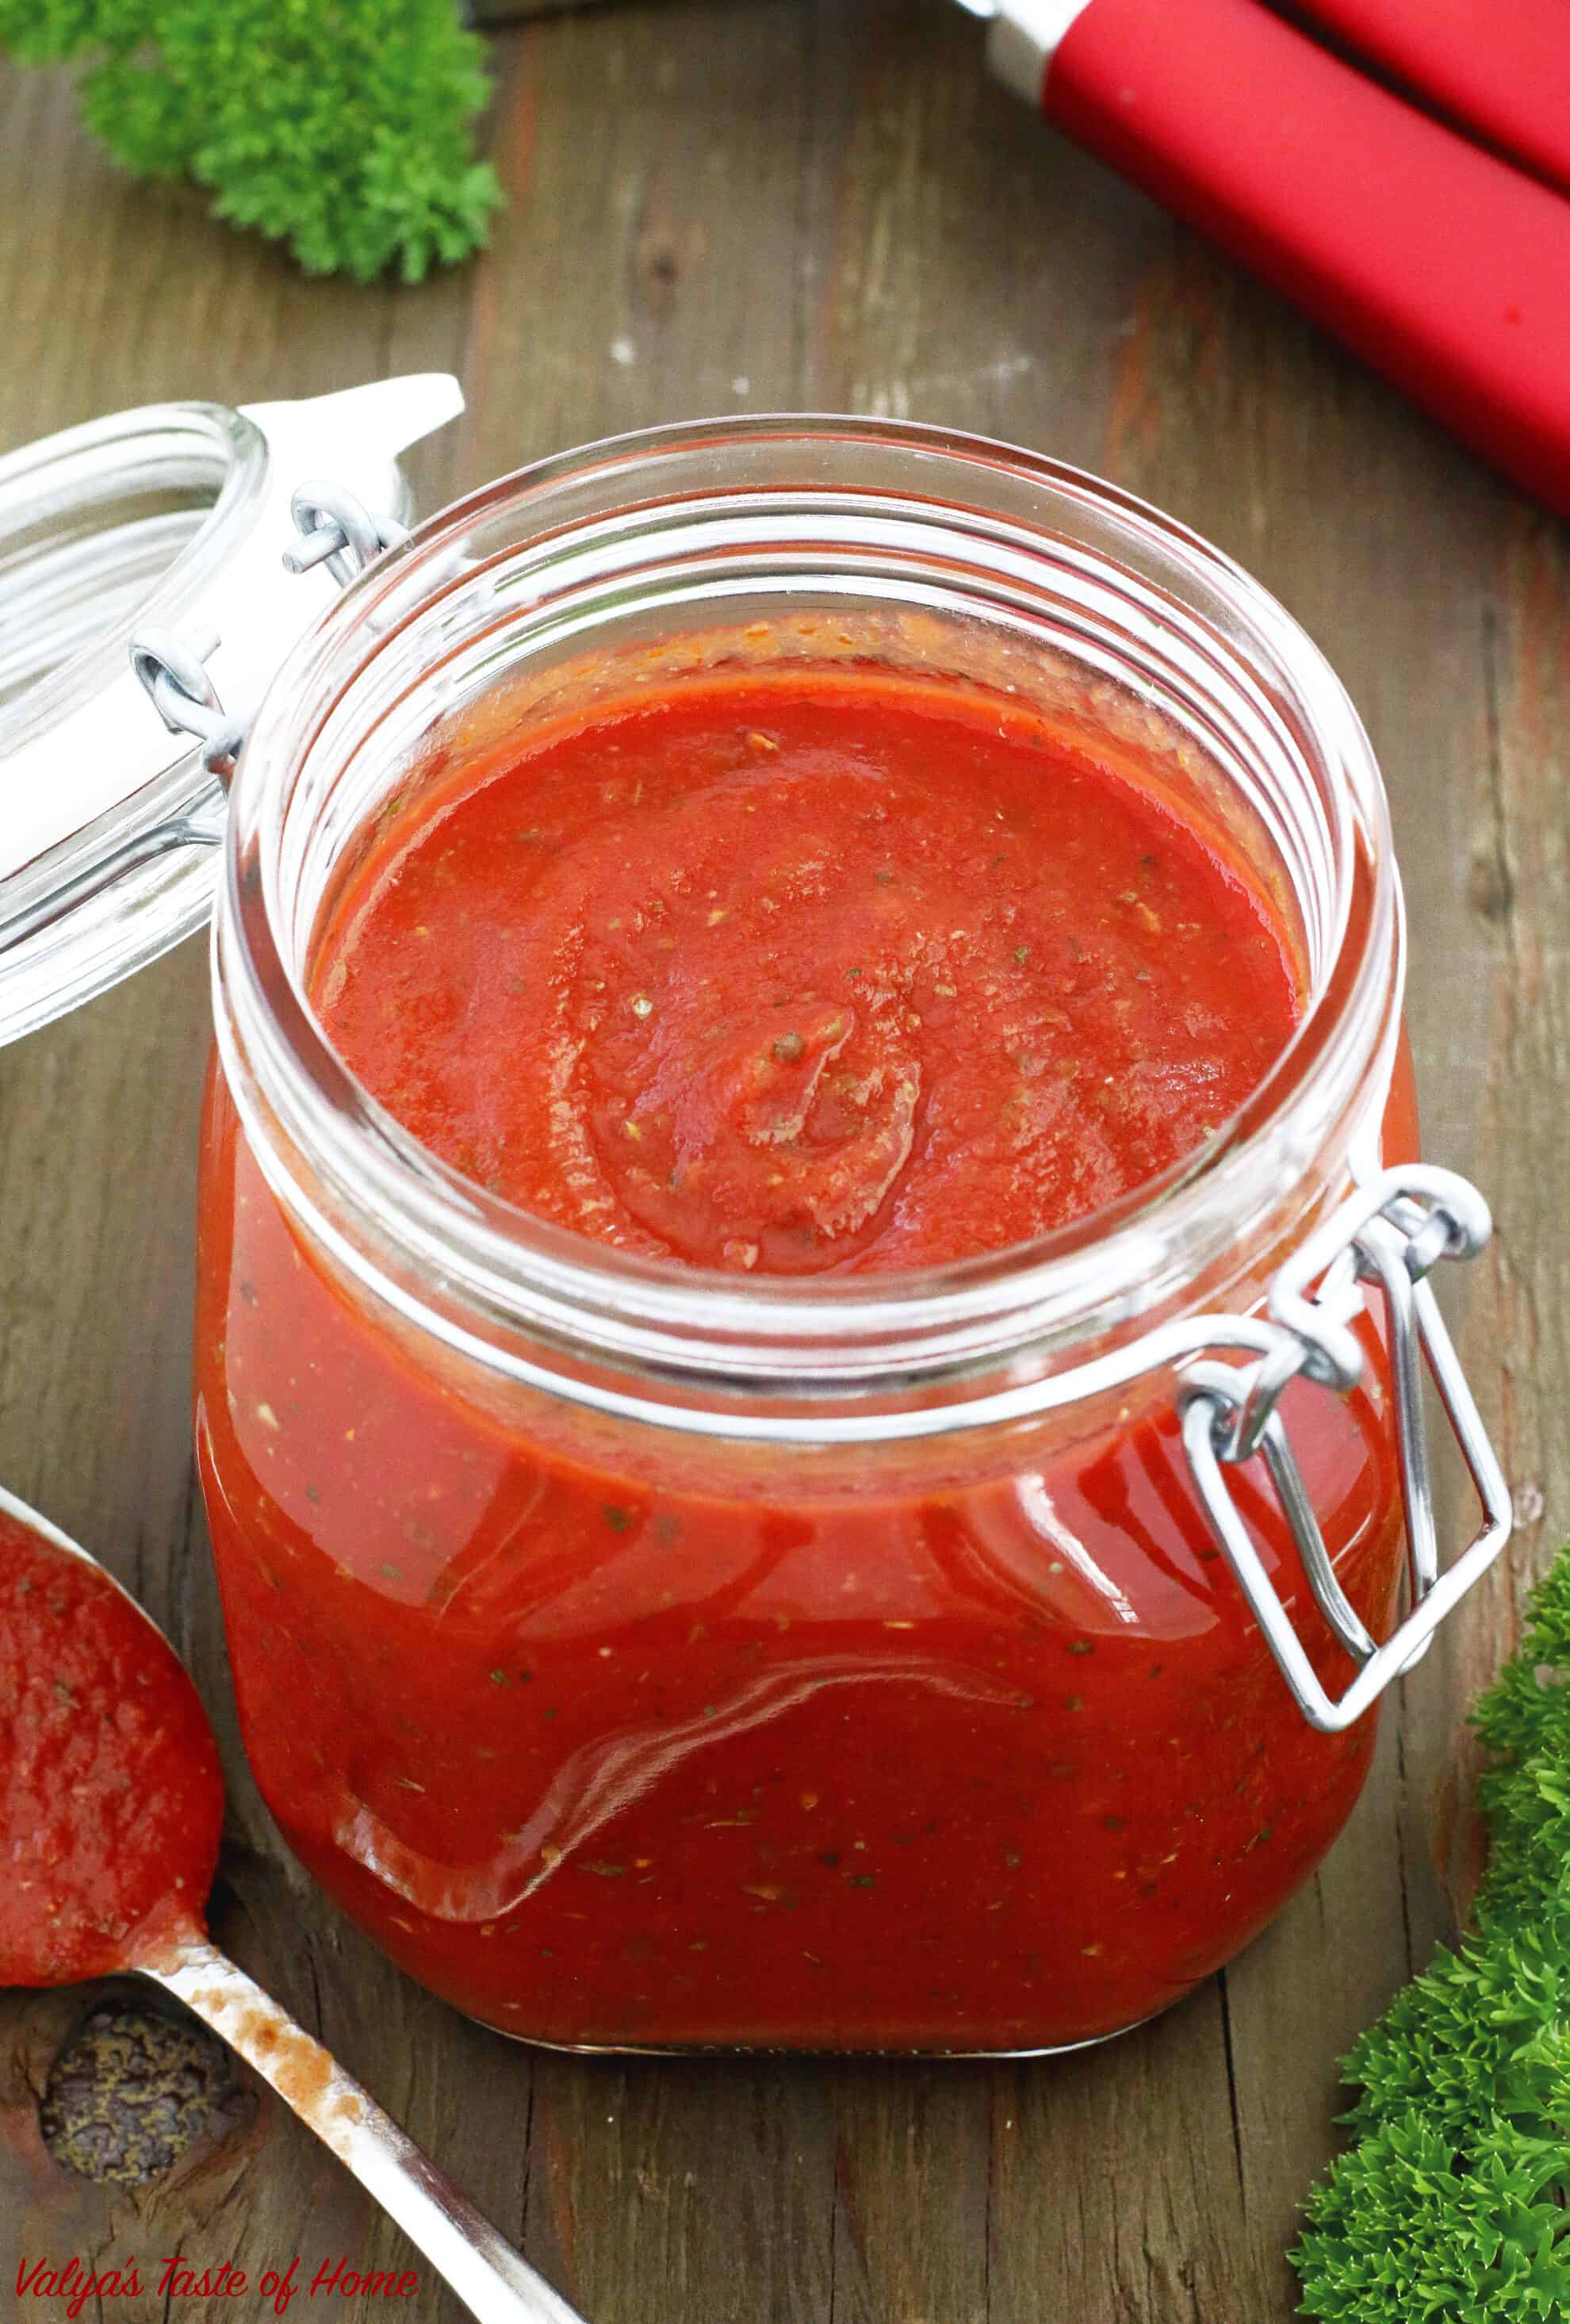 2 minute recipe, 4 ingredients pizza sauce, clean eating, delicious, easy, Easy Homemade Pizza Sauce Recipe, garlic powder, healthy eating, homemade pizza sauce, homemade tastes best, organic Italian seasoning, organic tomato sauce, pizza sauce, quick and easy recipe, sea salt, so flavorful, tasty